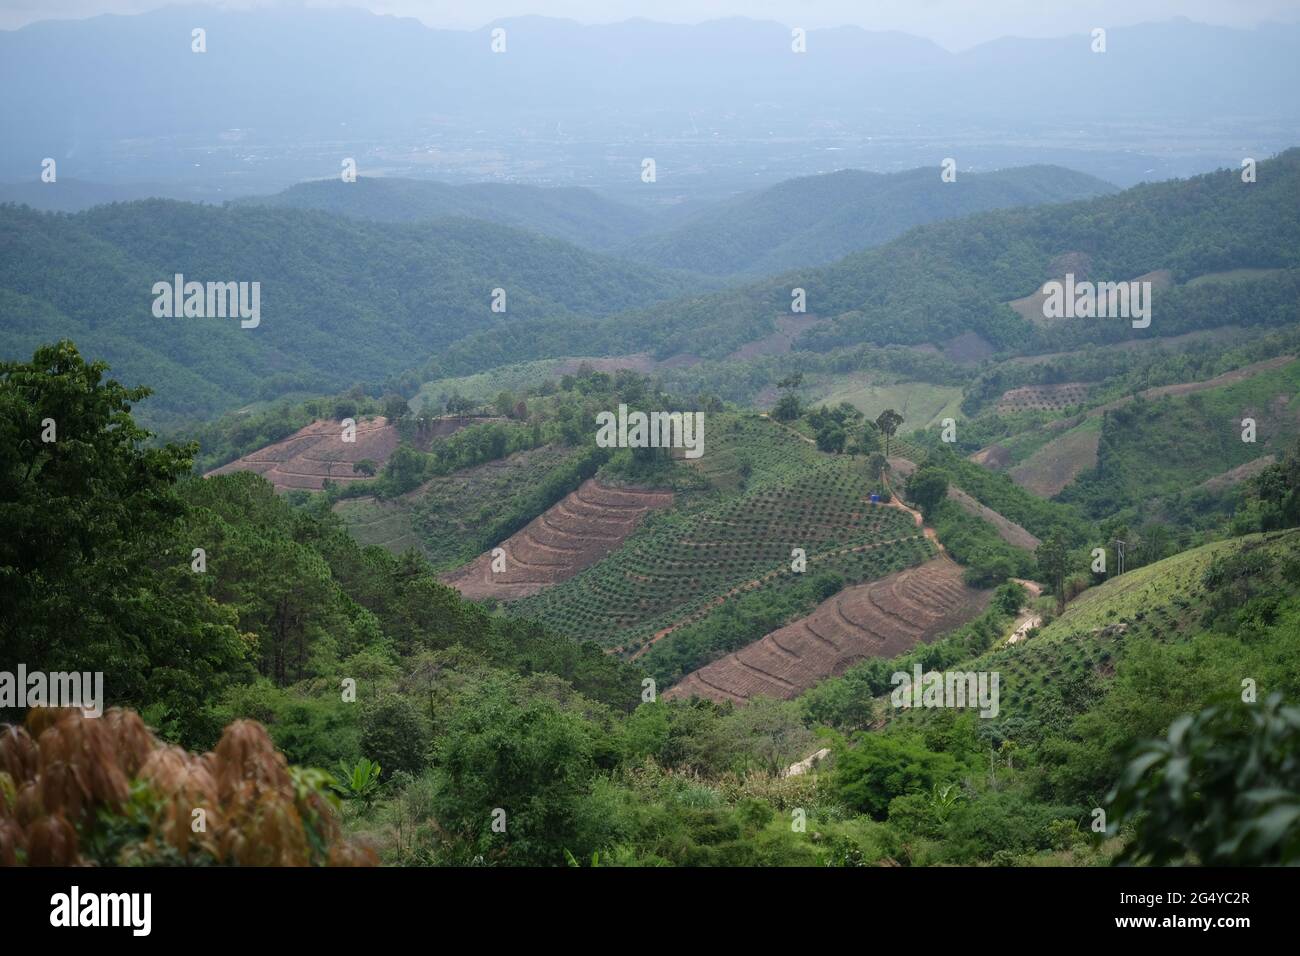 A row of terraced fields with tropical fruit trees in a Thai highland's valley Stock Photo